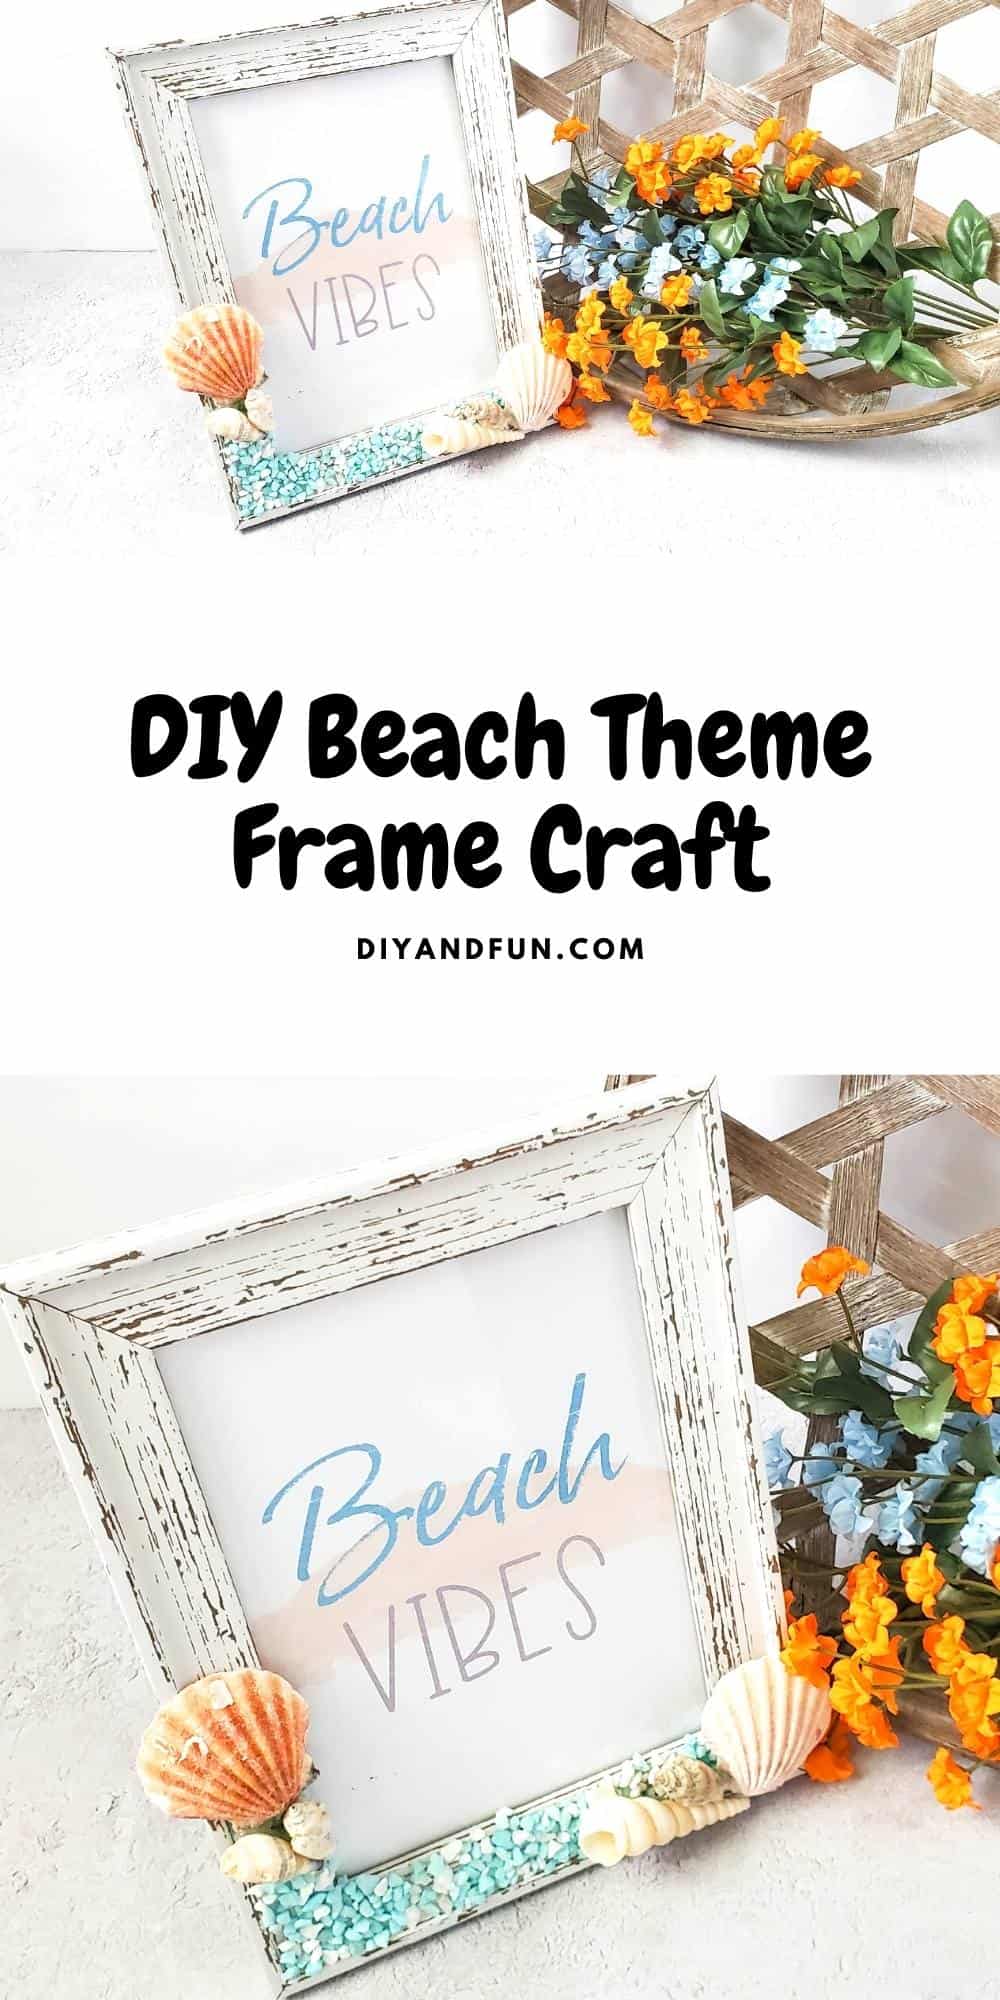 DIY Beach Theme Frame Craft, easy do it yourself project for decorating a picture frame with a beach theme.